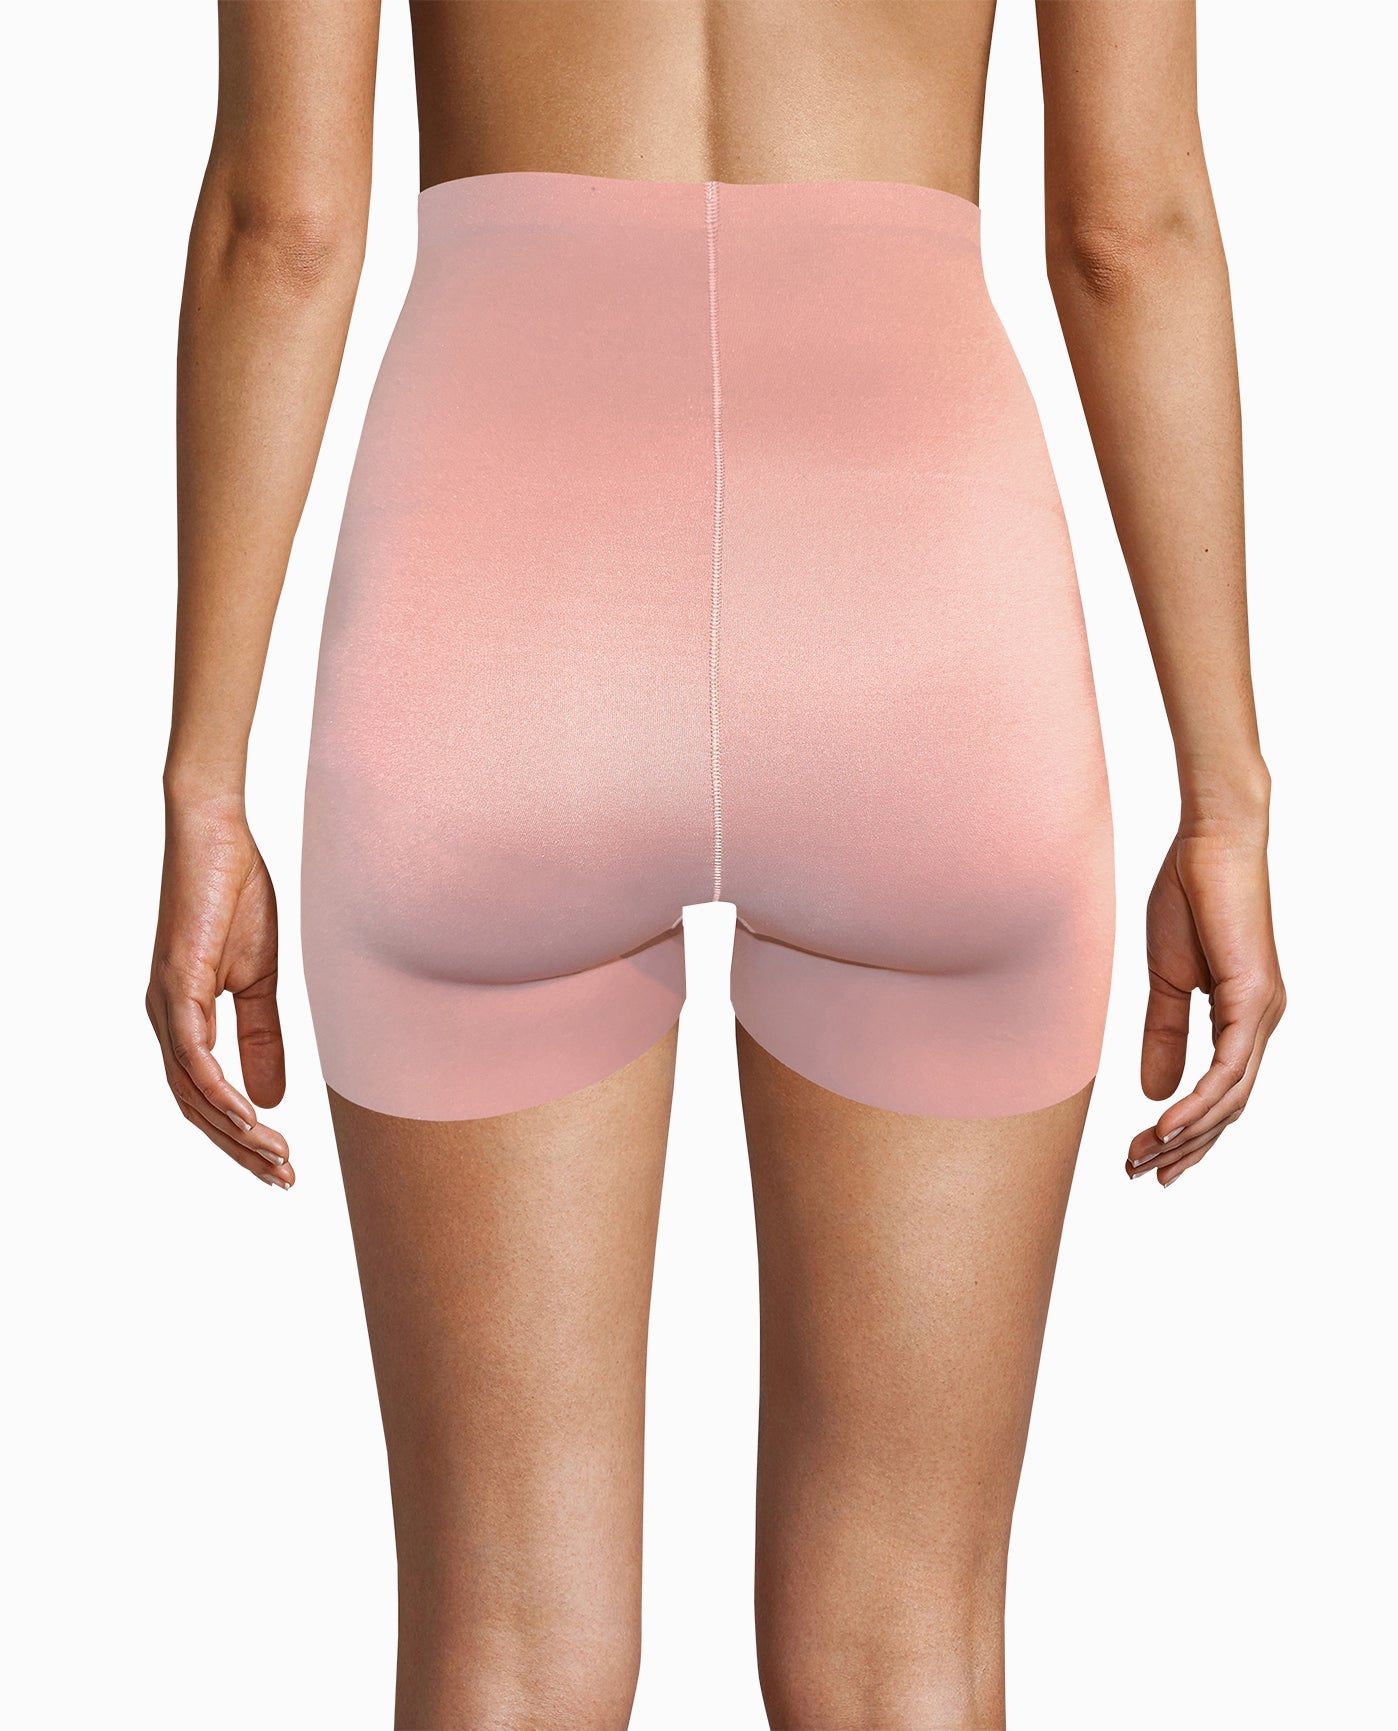 BACK OF CAFE LATTE SCUBA HIGH WAISTED SHAPING SHORTS | Black and Cafe Latte